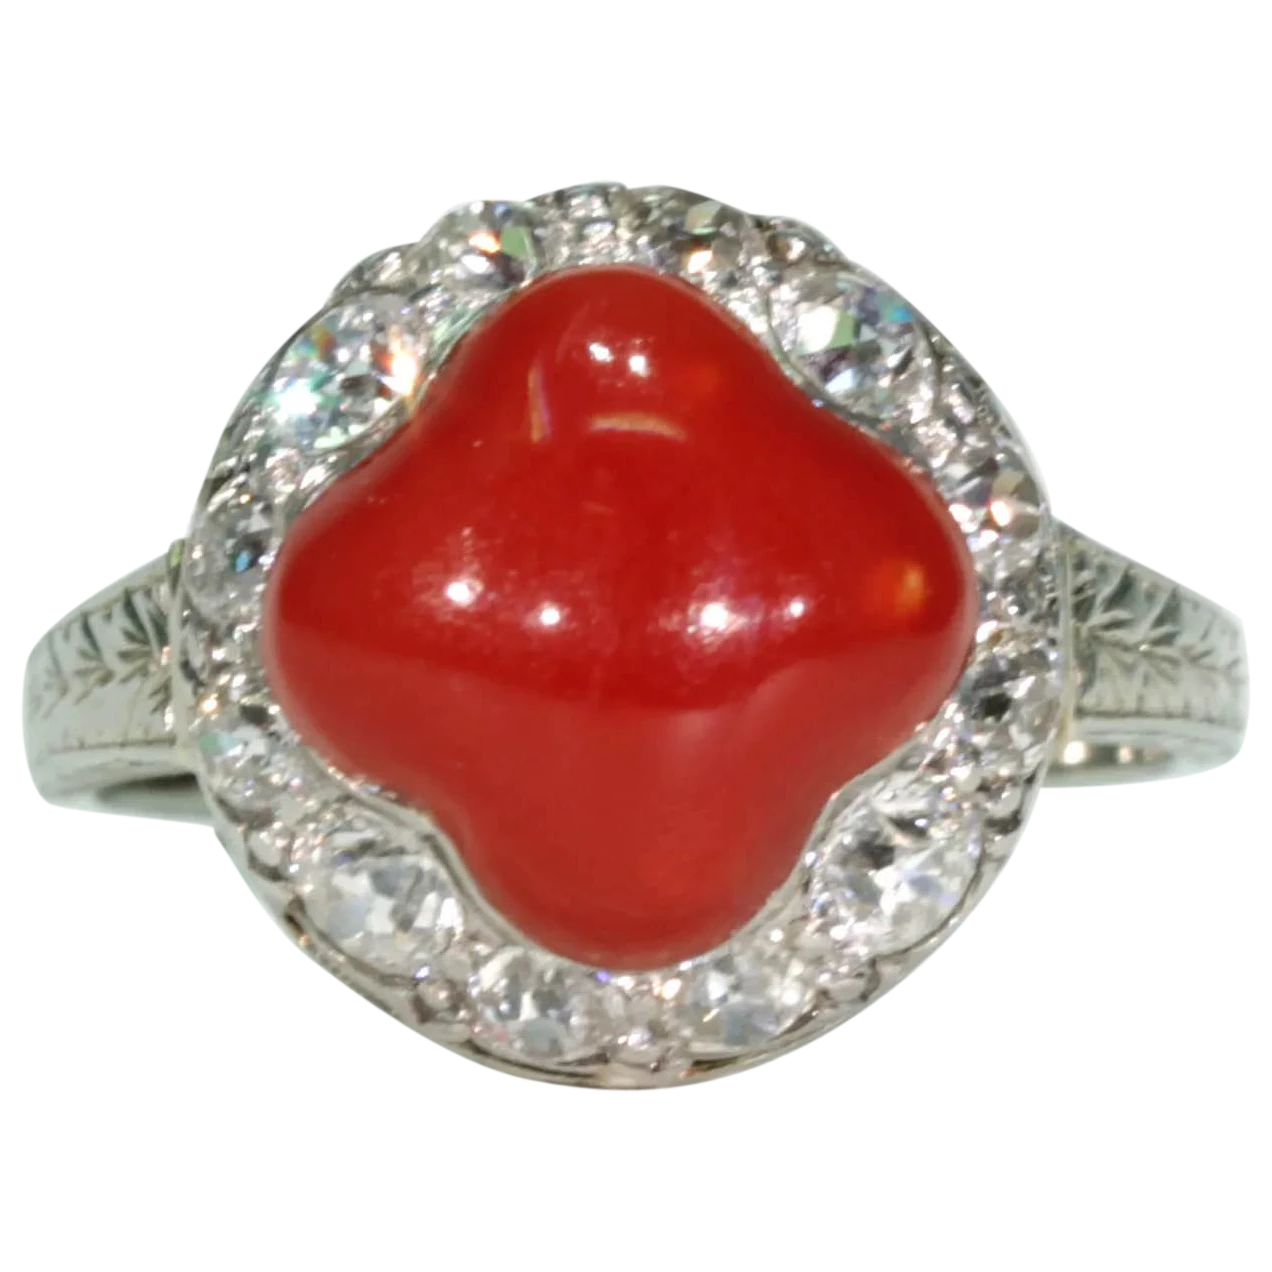 Antique Art Deco Red Coral Diamond Ring 14k White Gold